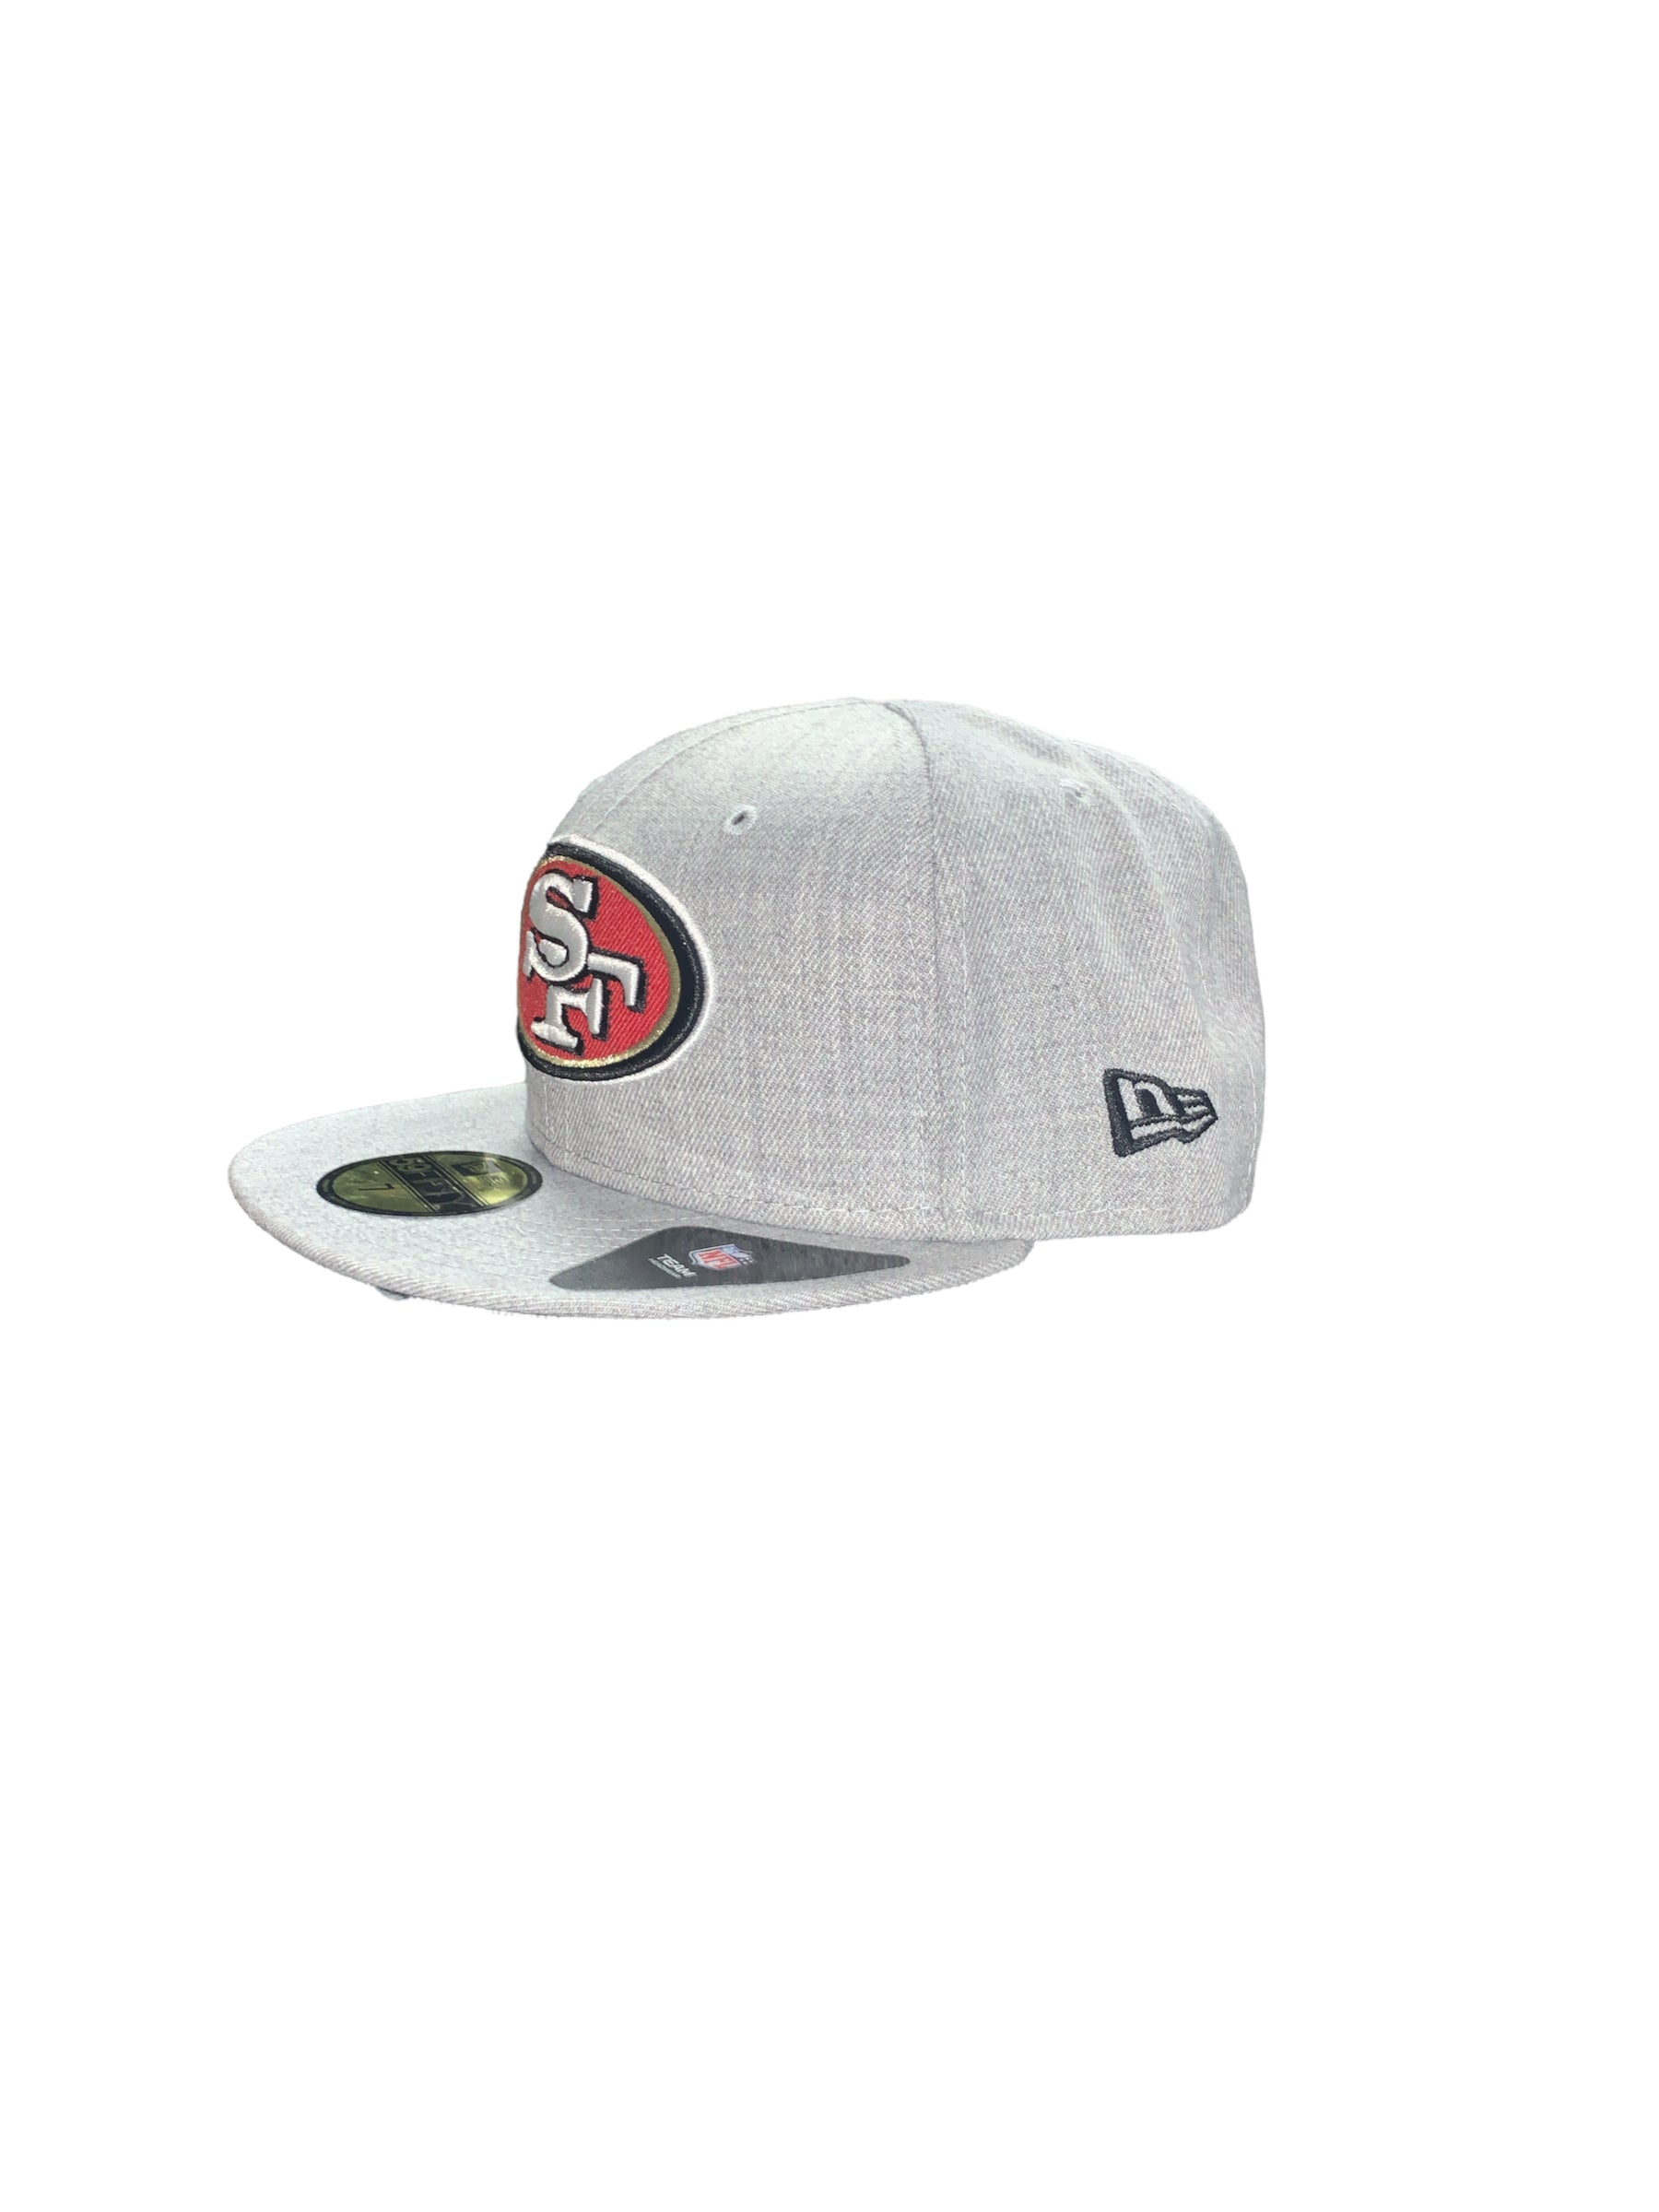 SF 49ers Heather Hype Fitted Cap